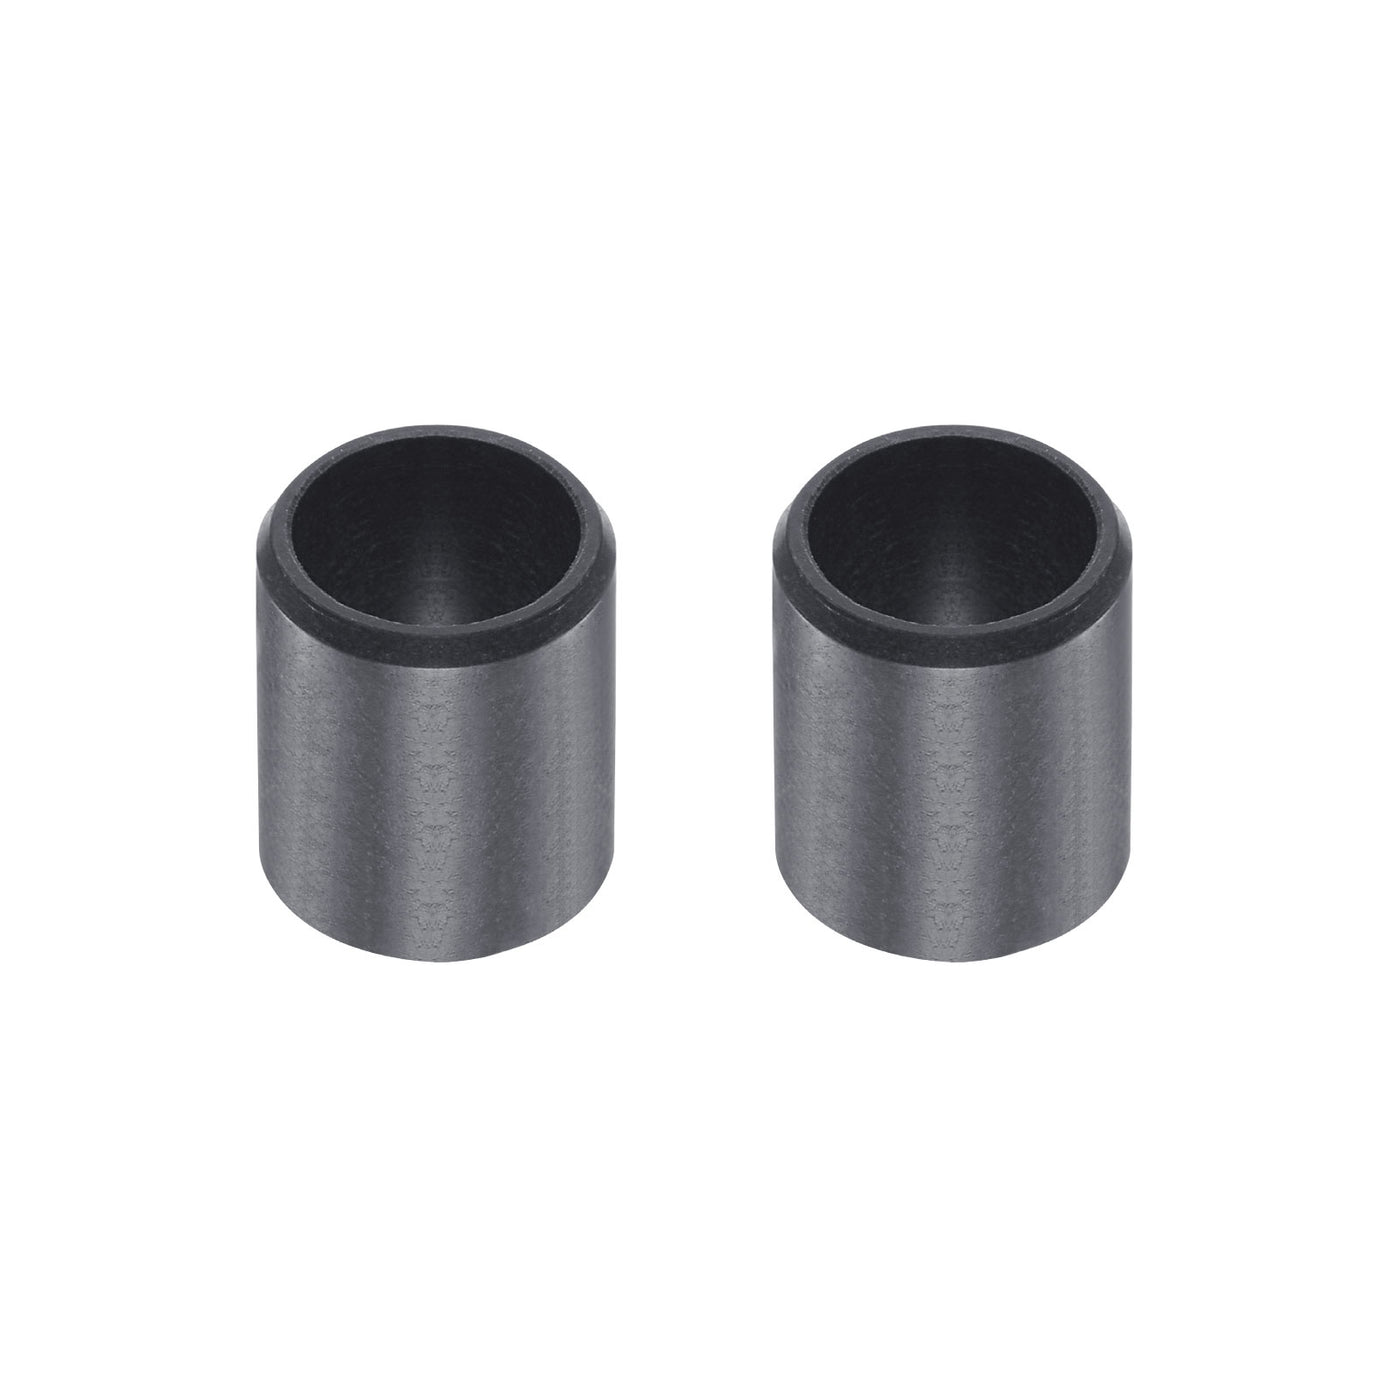 uxcell Uxcell Sleeve Bearings 8mmx10mmx15mm POM Wrapped Oilless Bushings Black 2pcs